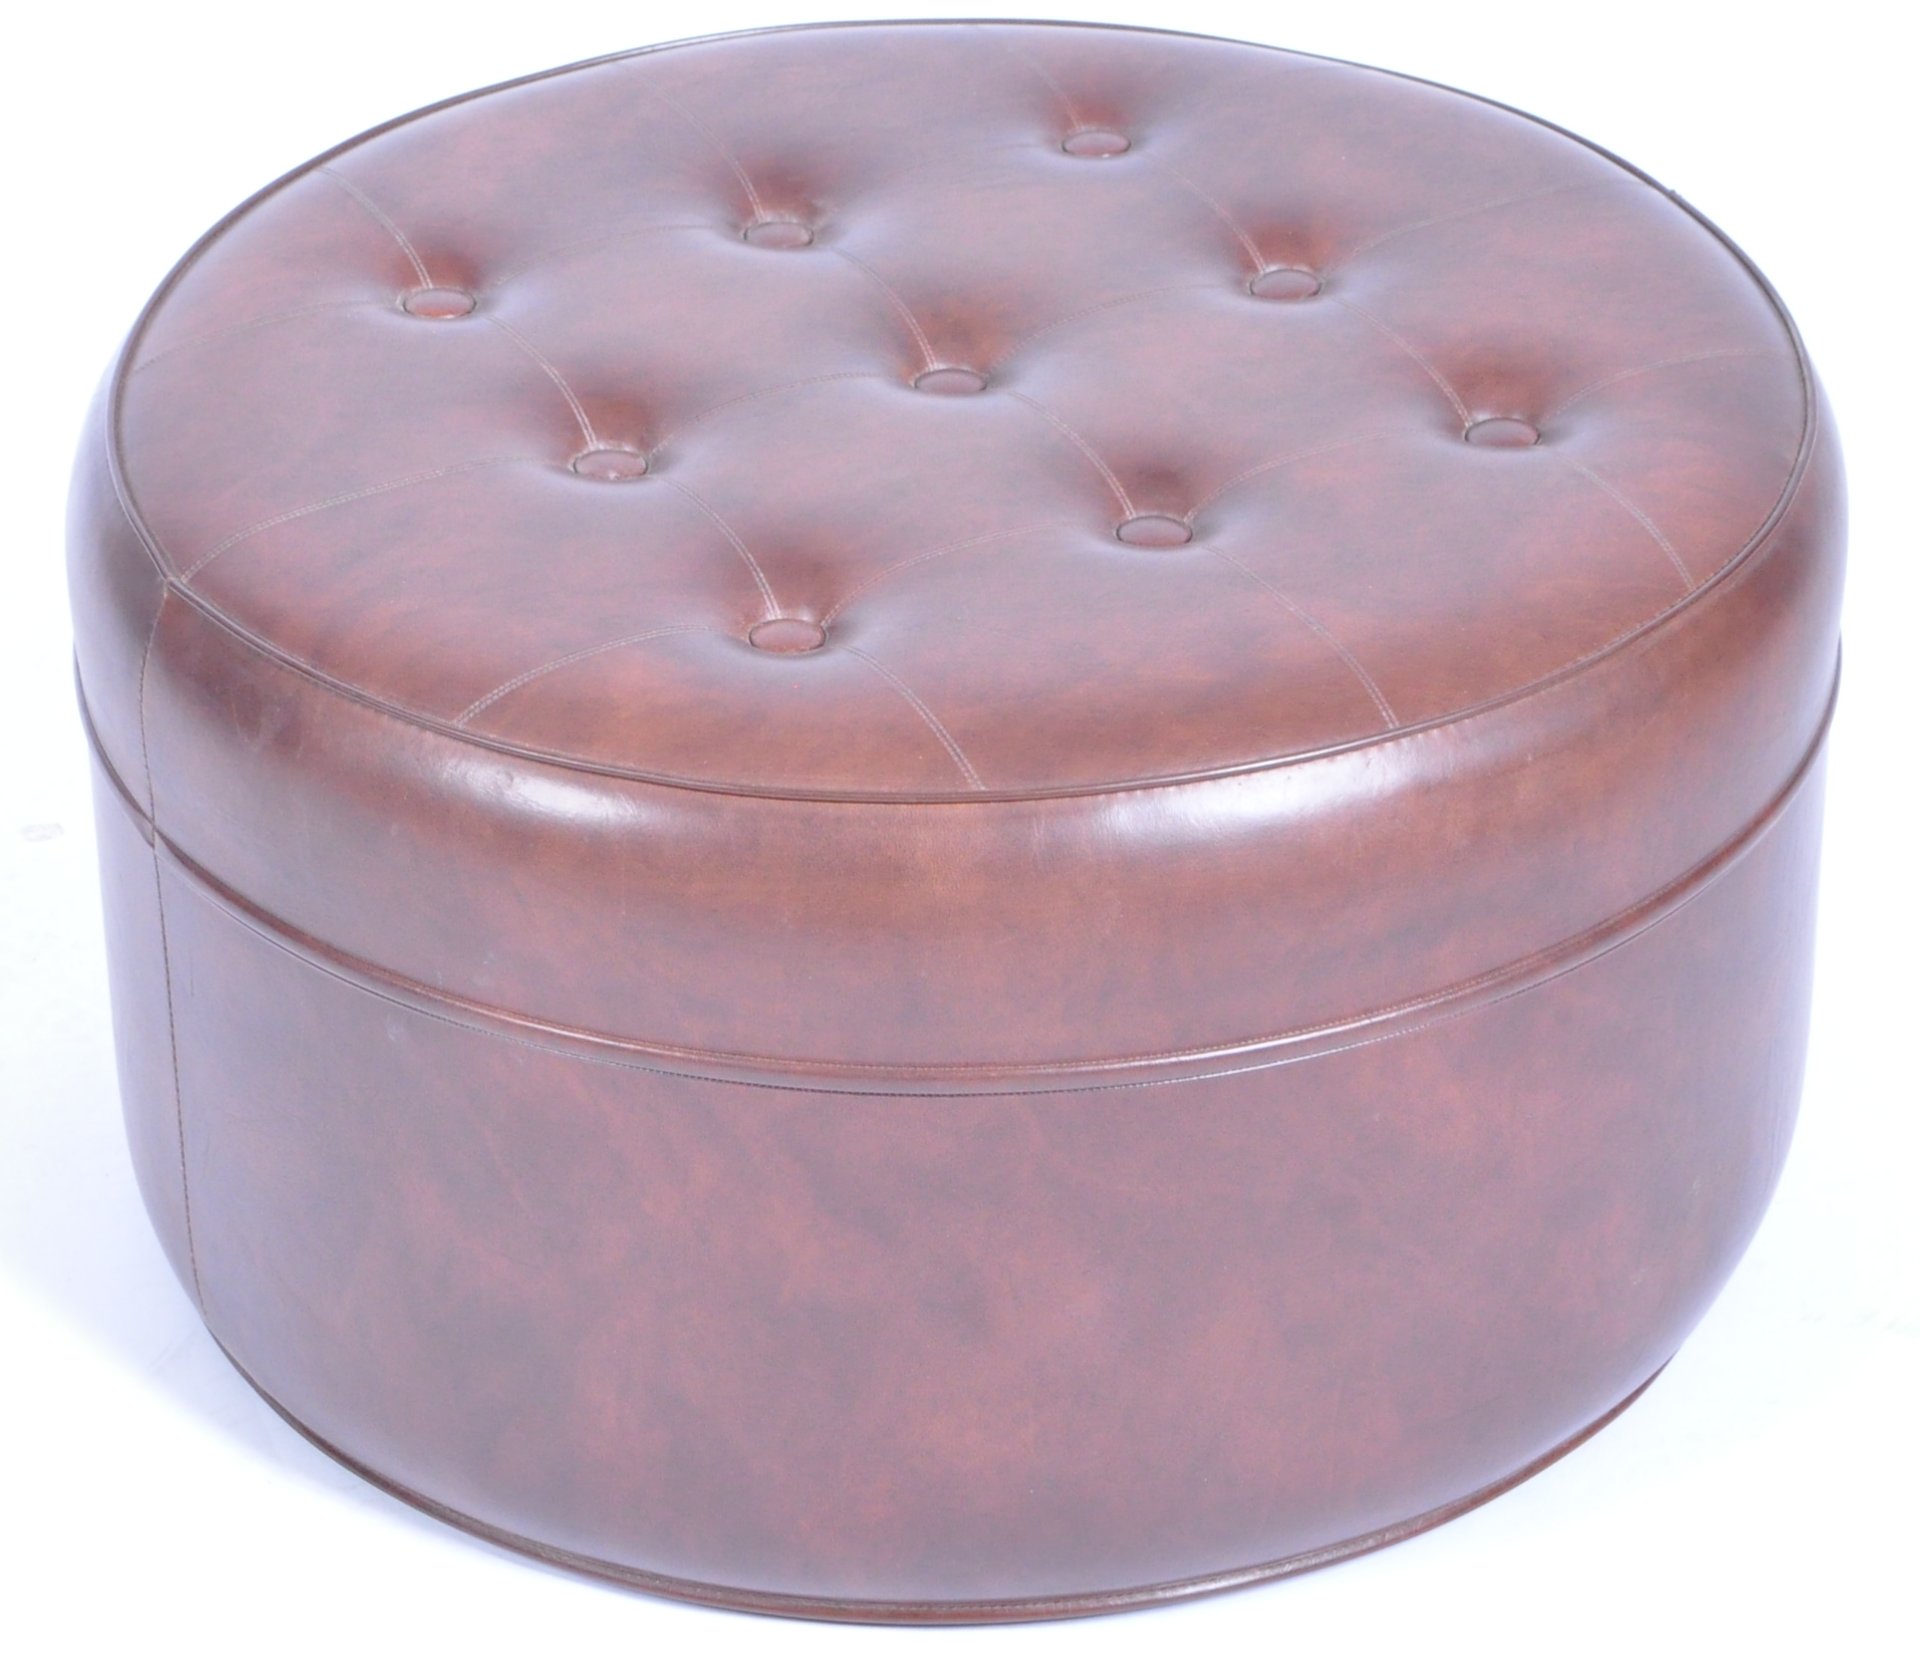 SHERBORNE VINTAGE BROWN LEATHER BUTTON TOPPED FOOTSTOOL - Image 2 of 5